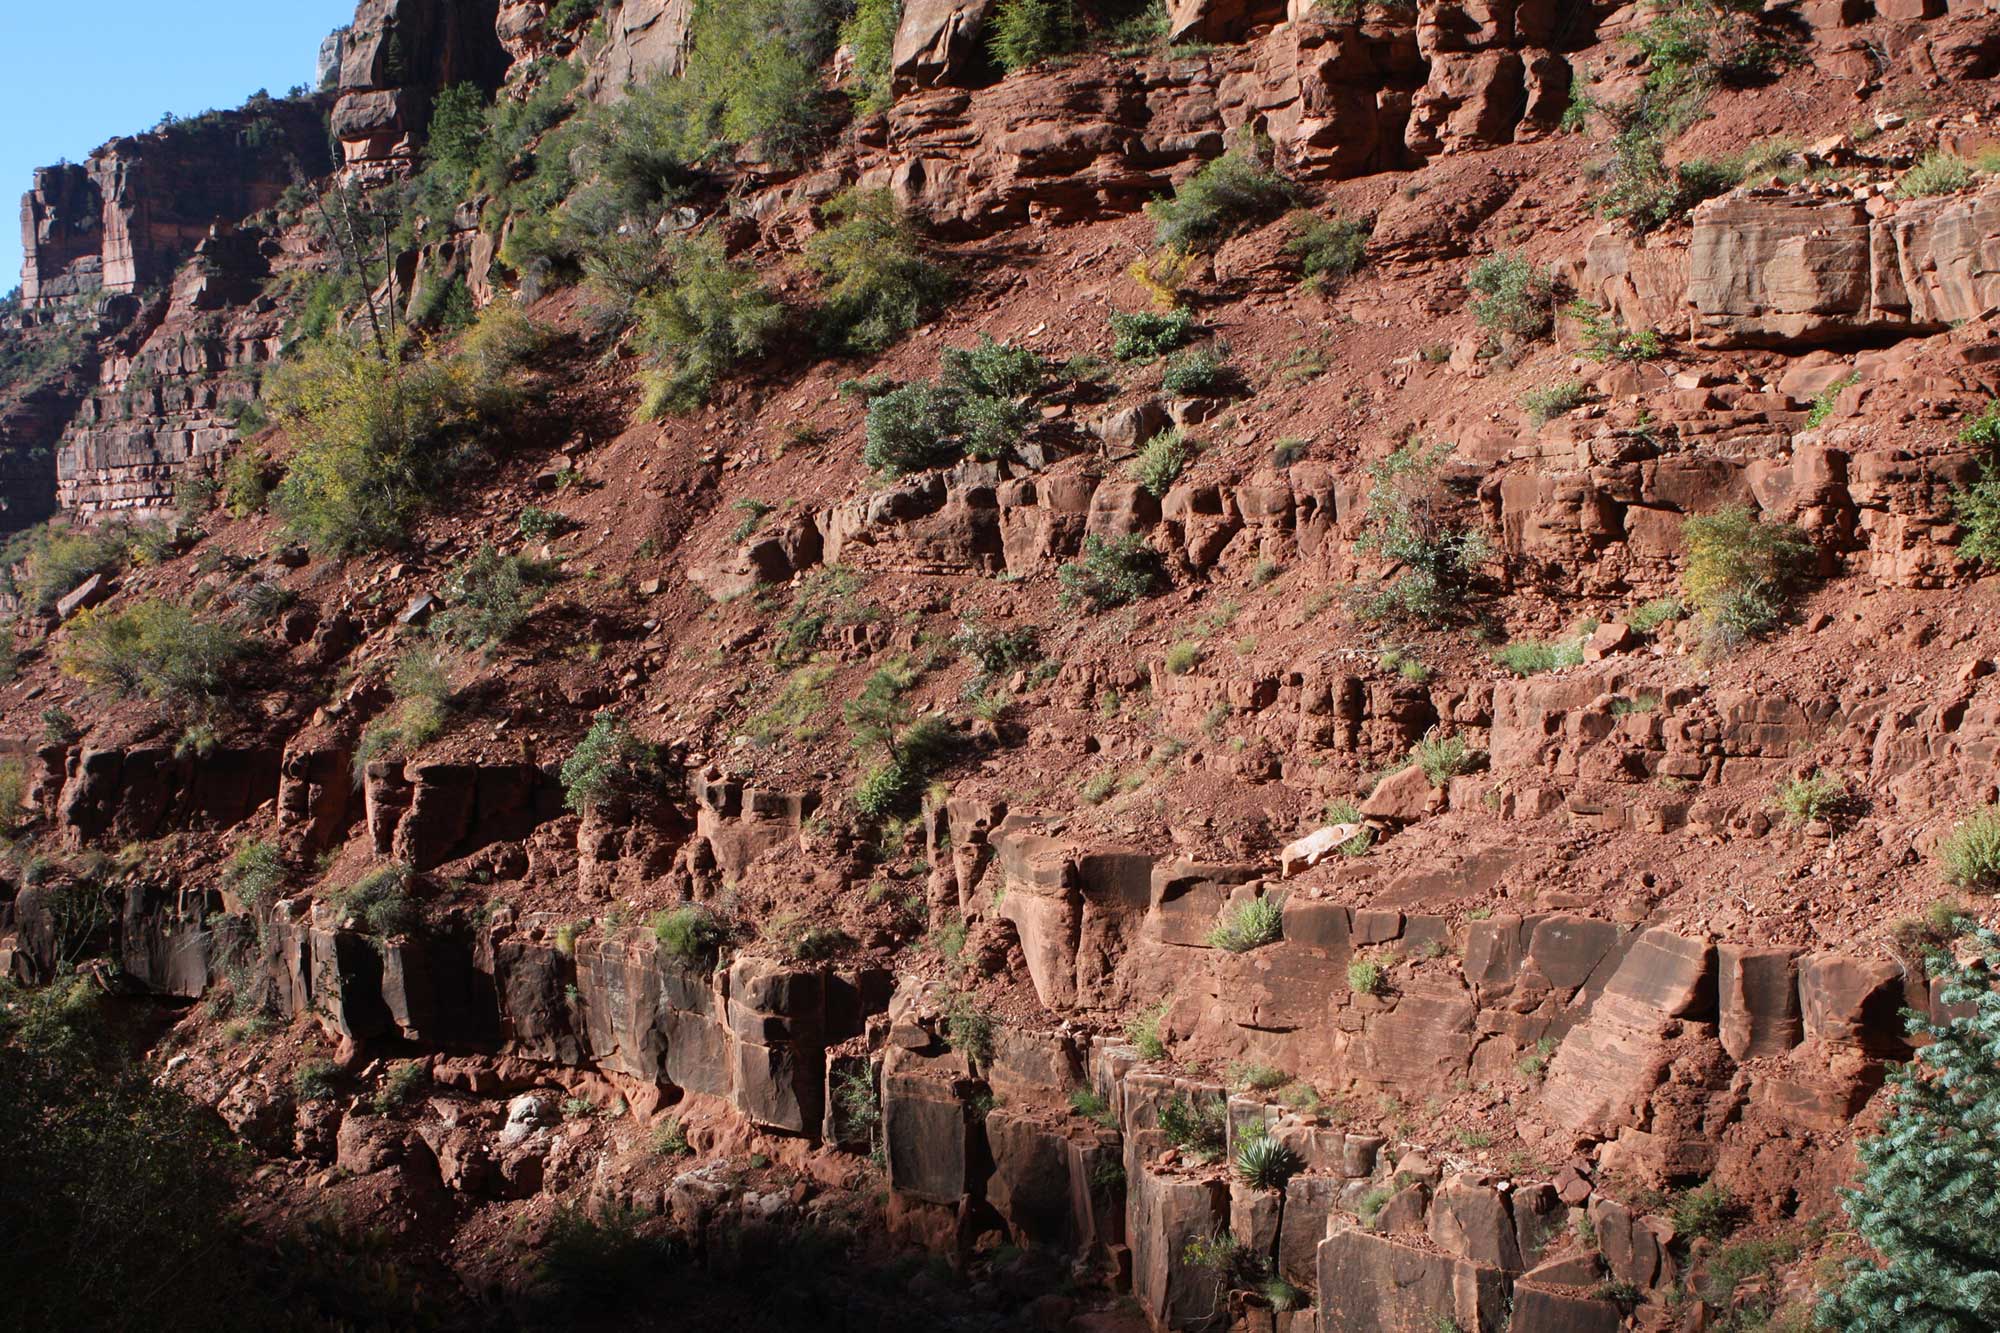 Photograph of an outcrop of Hermit Shale (or the Hermit Formation) in the Grant Canyon, Arizona. The rocks are dark pinkish-brown in color and exposed in thick layers with short, eroded, sloping areas in between.